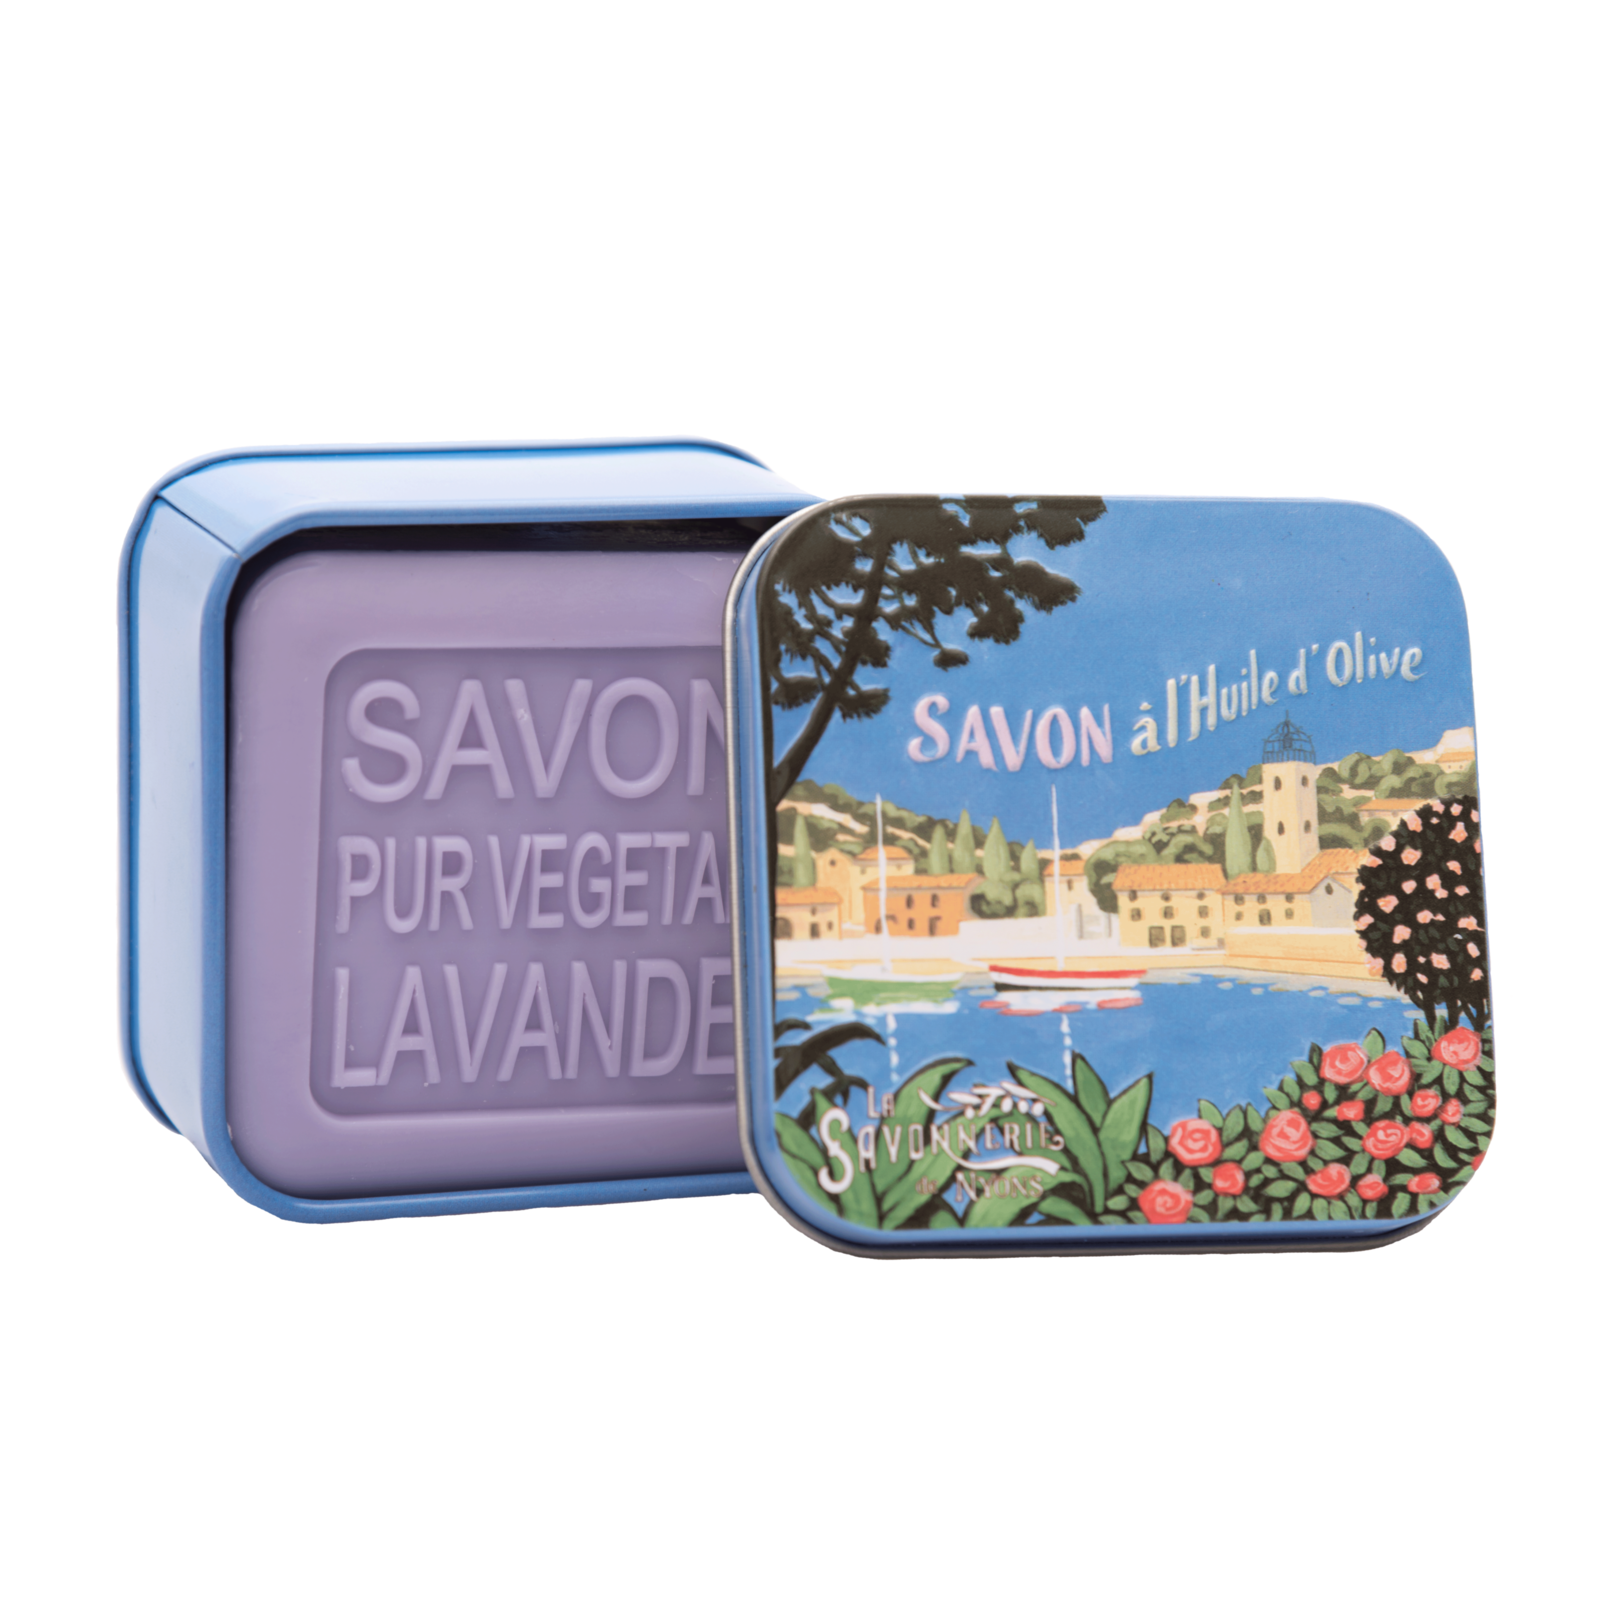 100g Soap in Tin Box "Côte d'Azur Marina" Pack of 3 - French Dry Goods